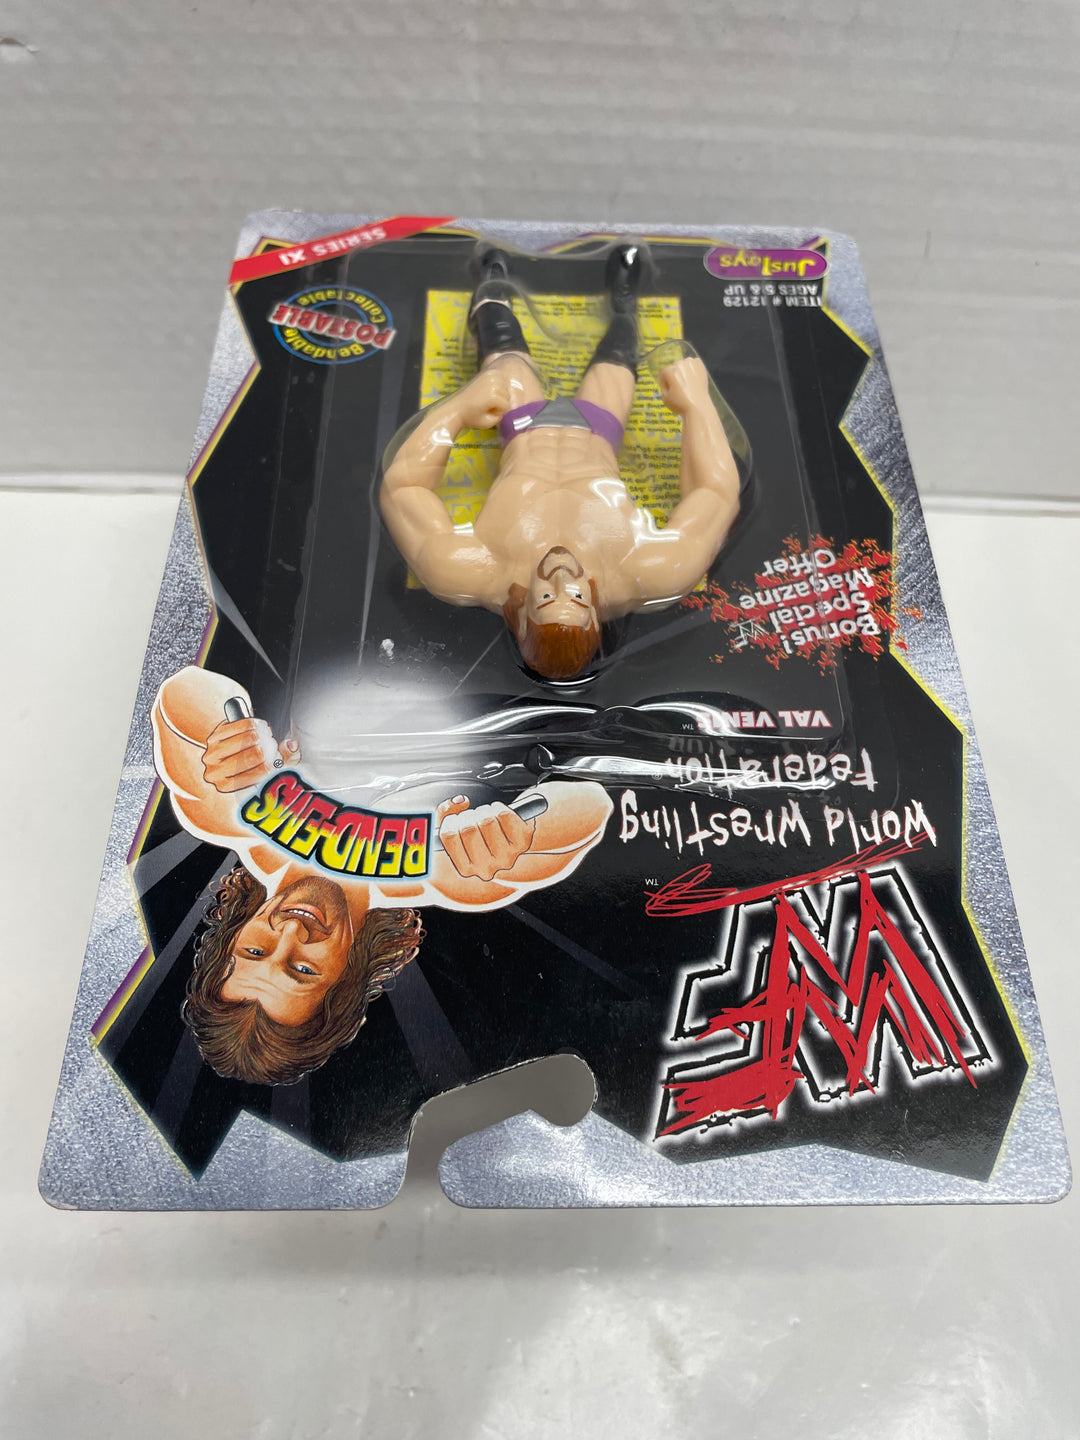 WWF Val Venis Bend-Ems Poseable Collection Series VIII JusToys MOC 1998